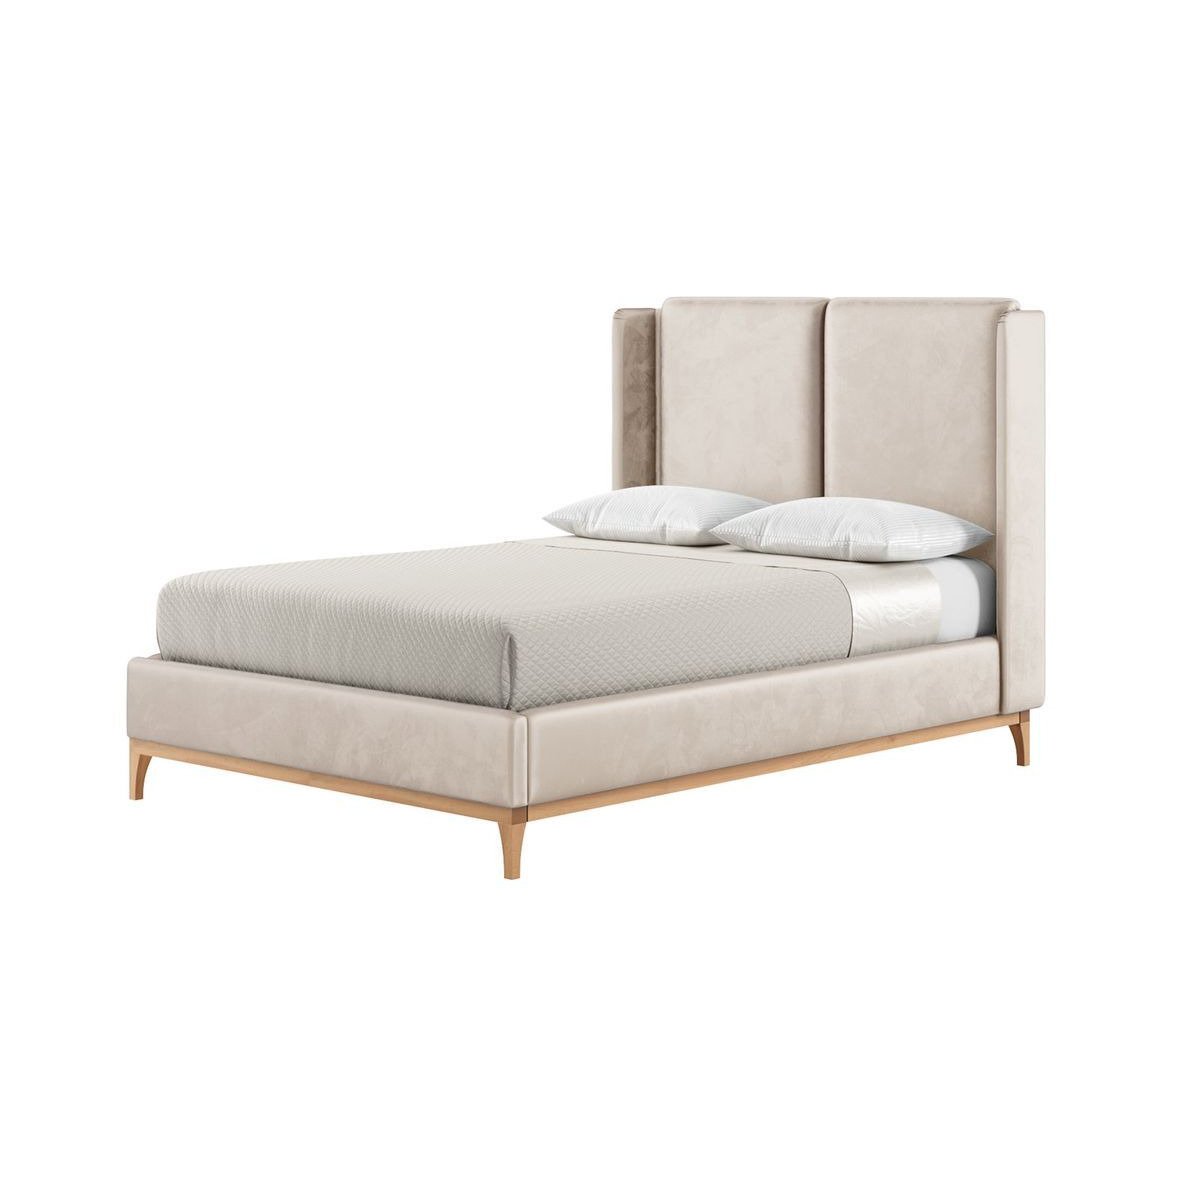 Emily 4ft6 Double Bed Frame with contemporary twin panel wing headboard, light beige, Leg colour: like oak - image 1